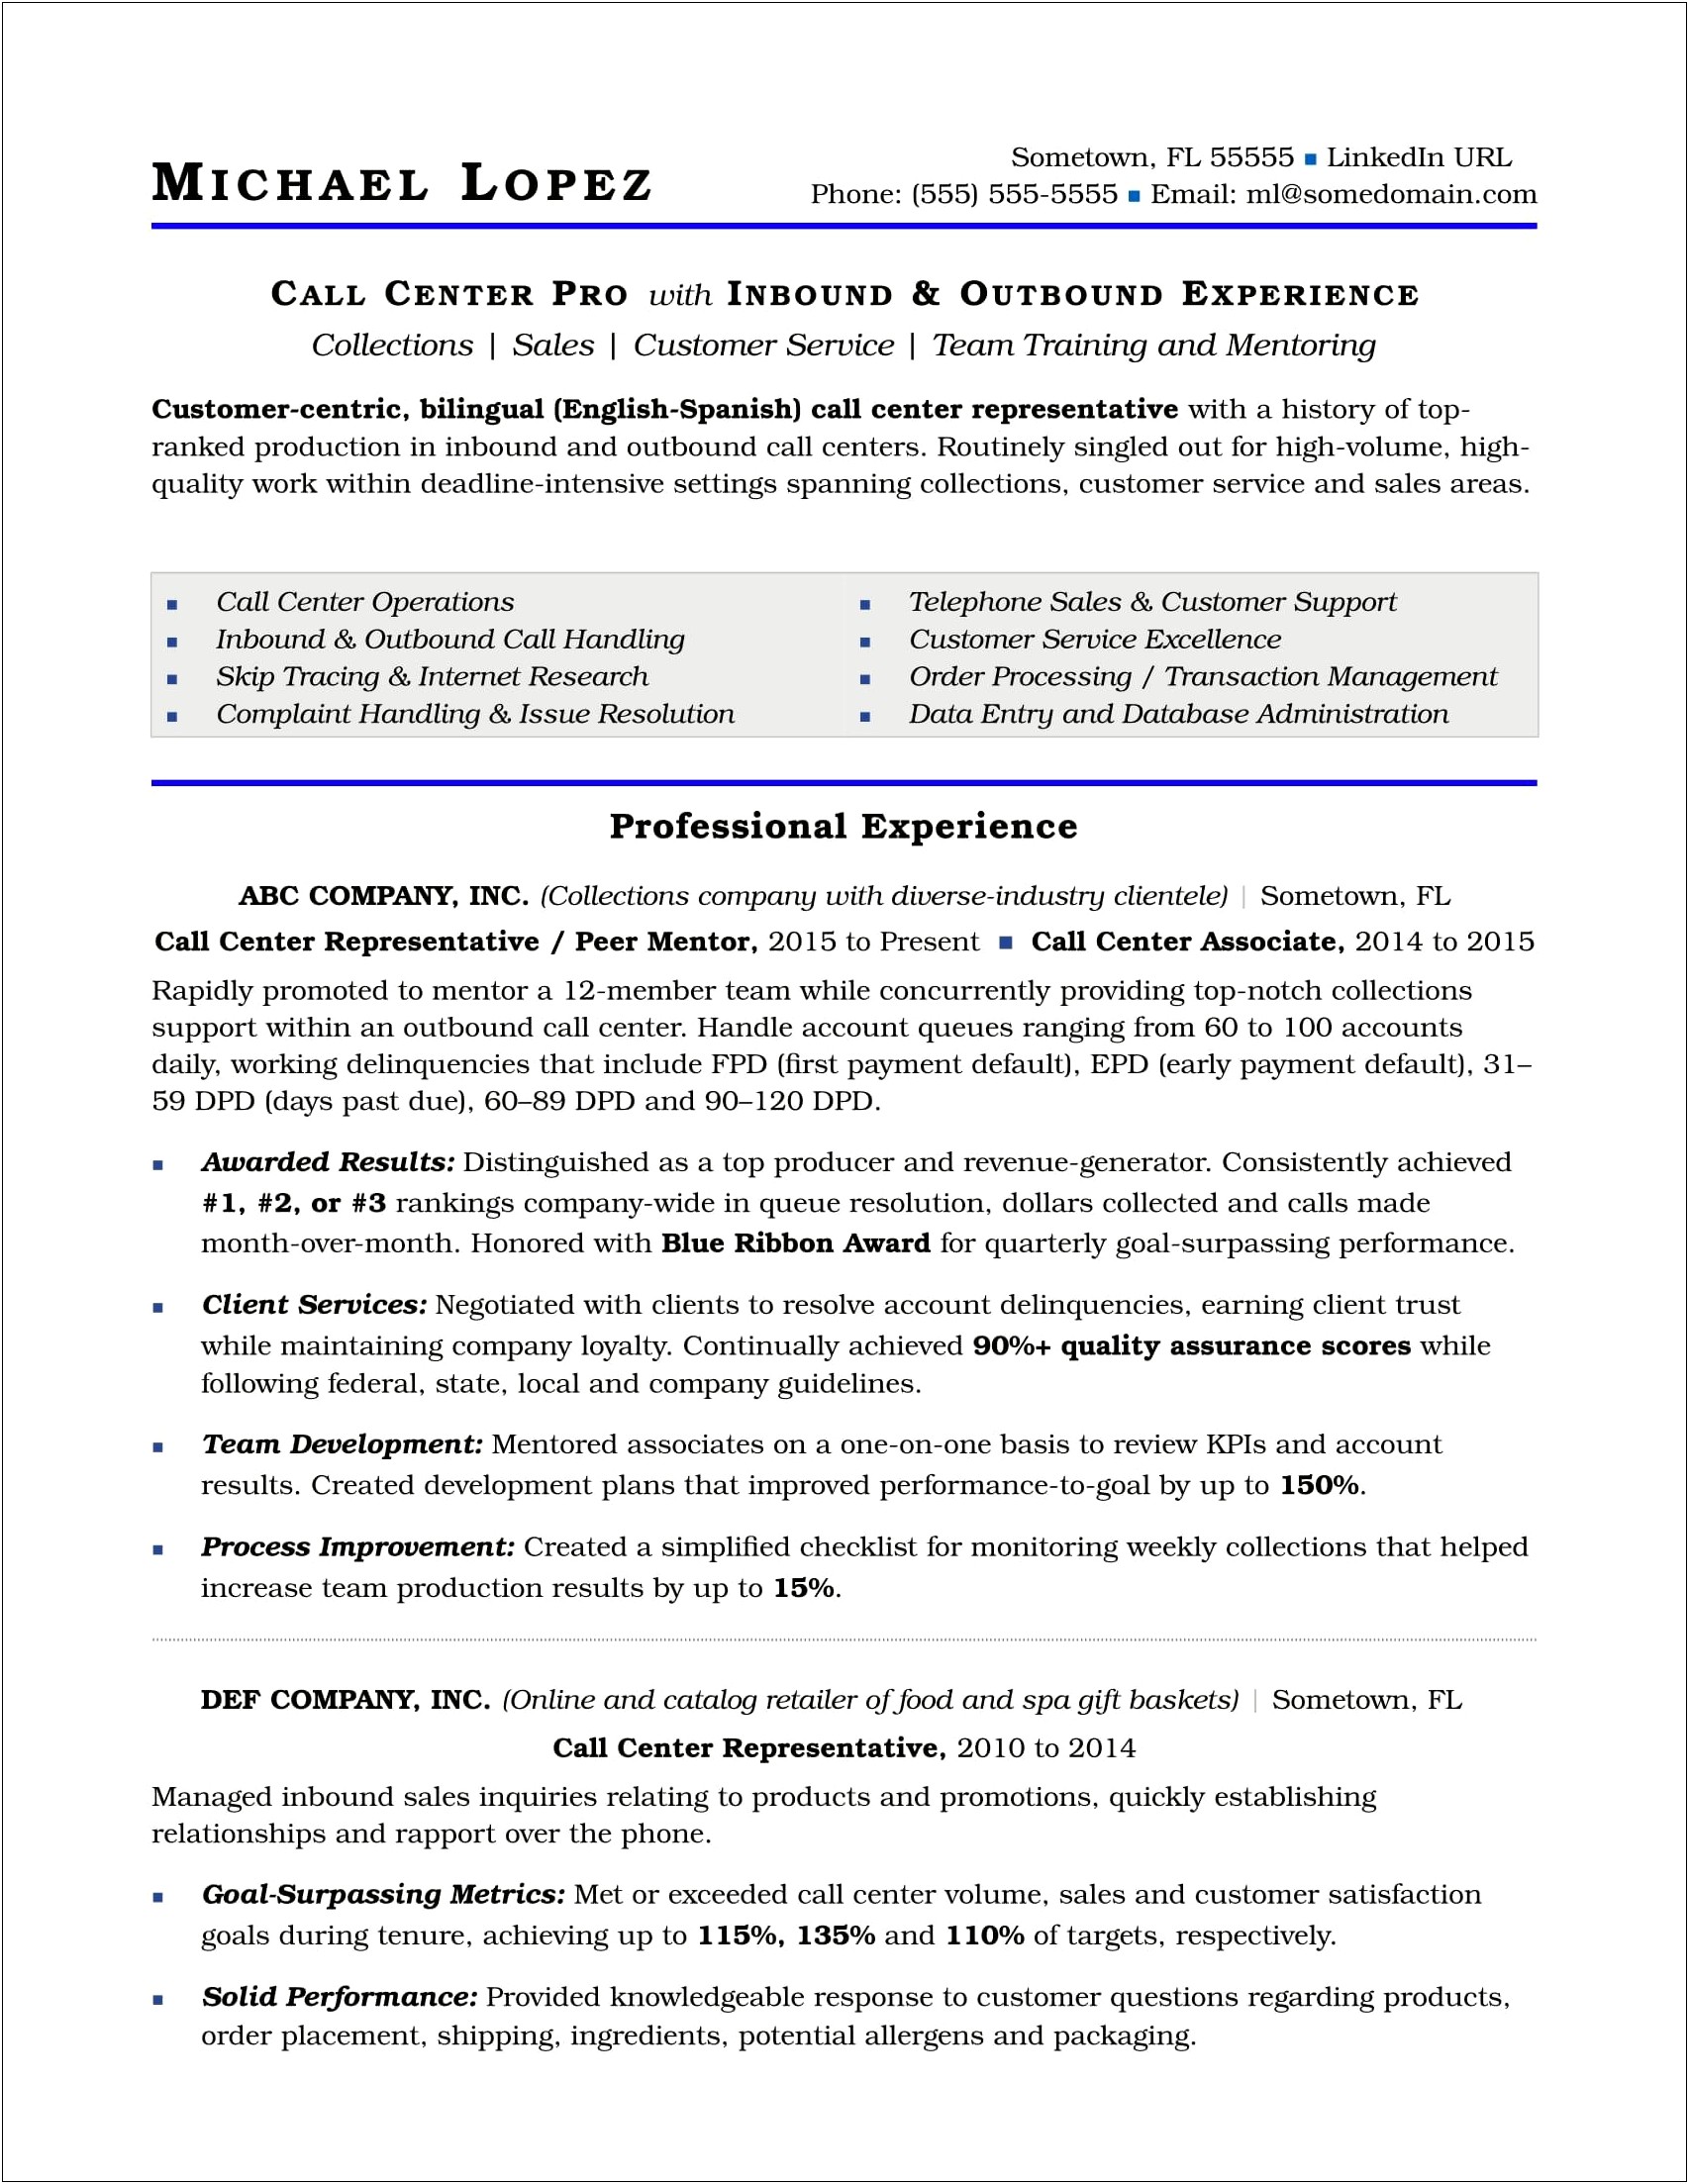 Objective Statement For Resume Examples Customer Service